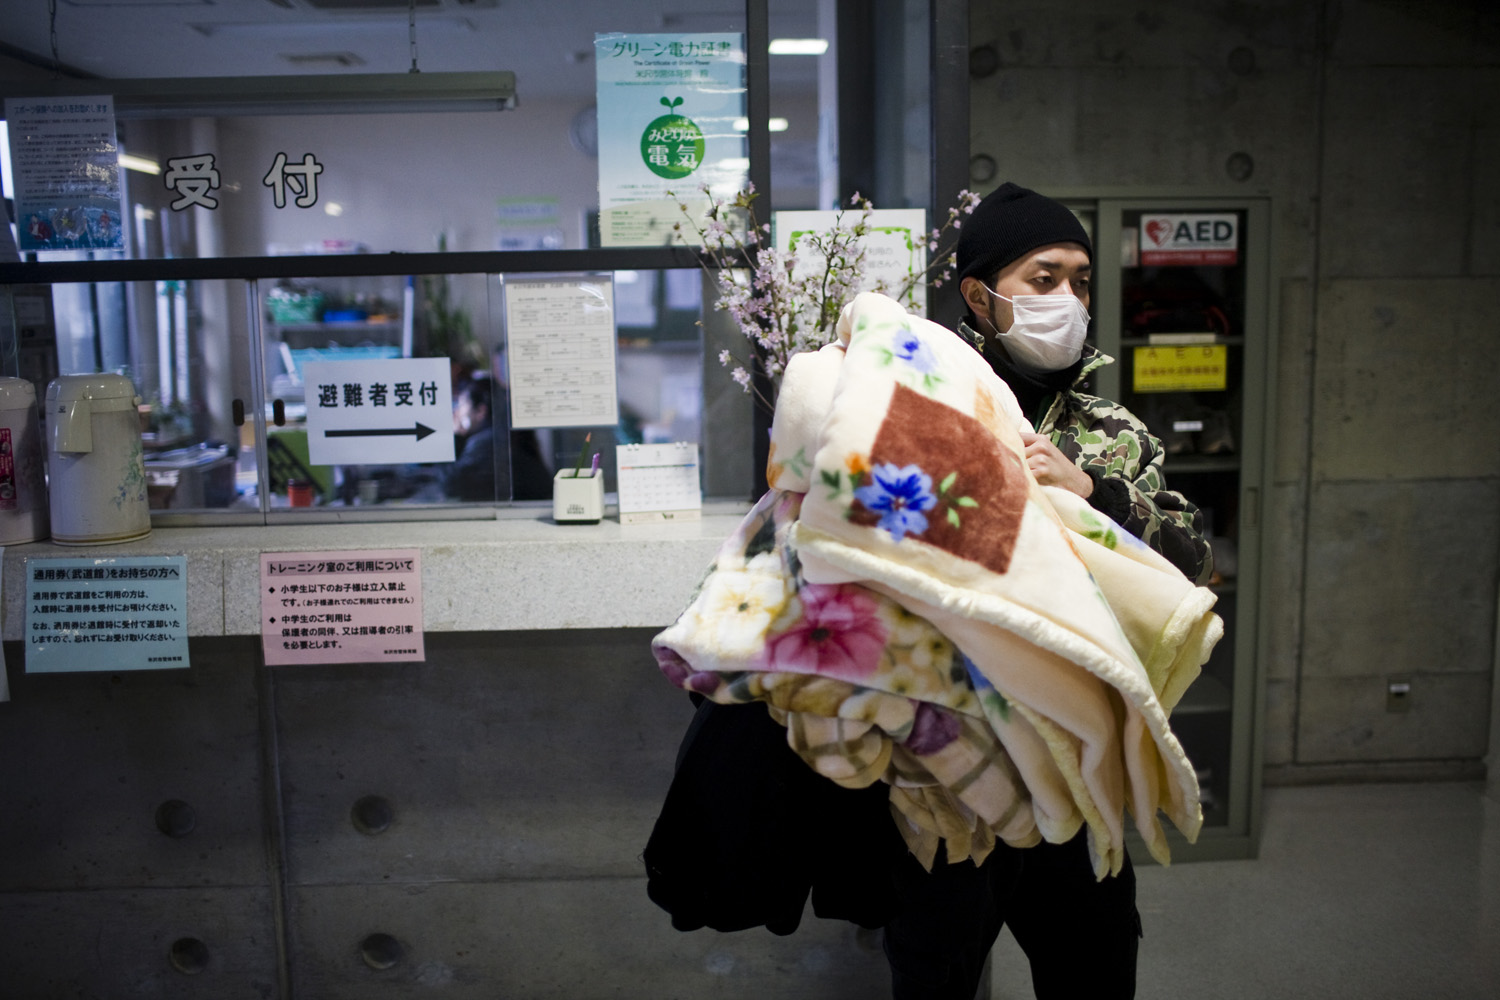 A man from an evacuation zone seeks refuge at a school gymnasium in Yonezawa on March 16, 2011